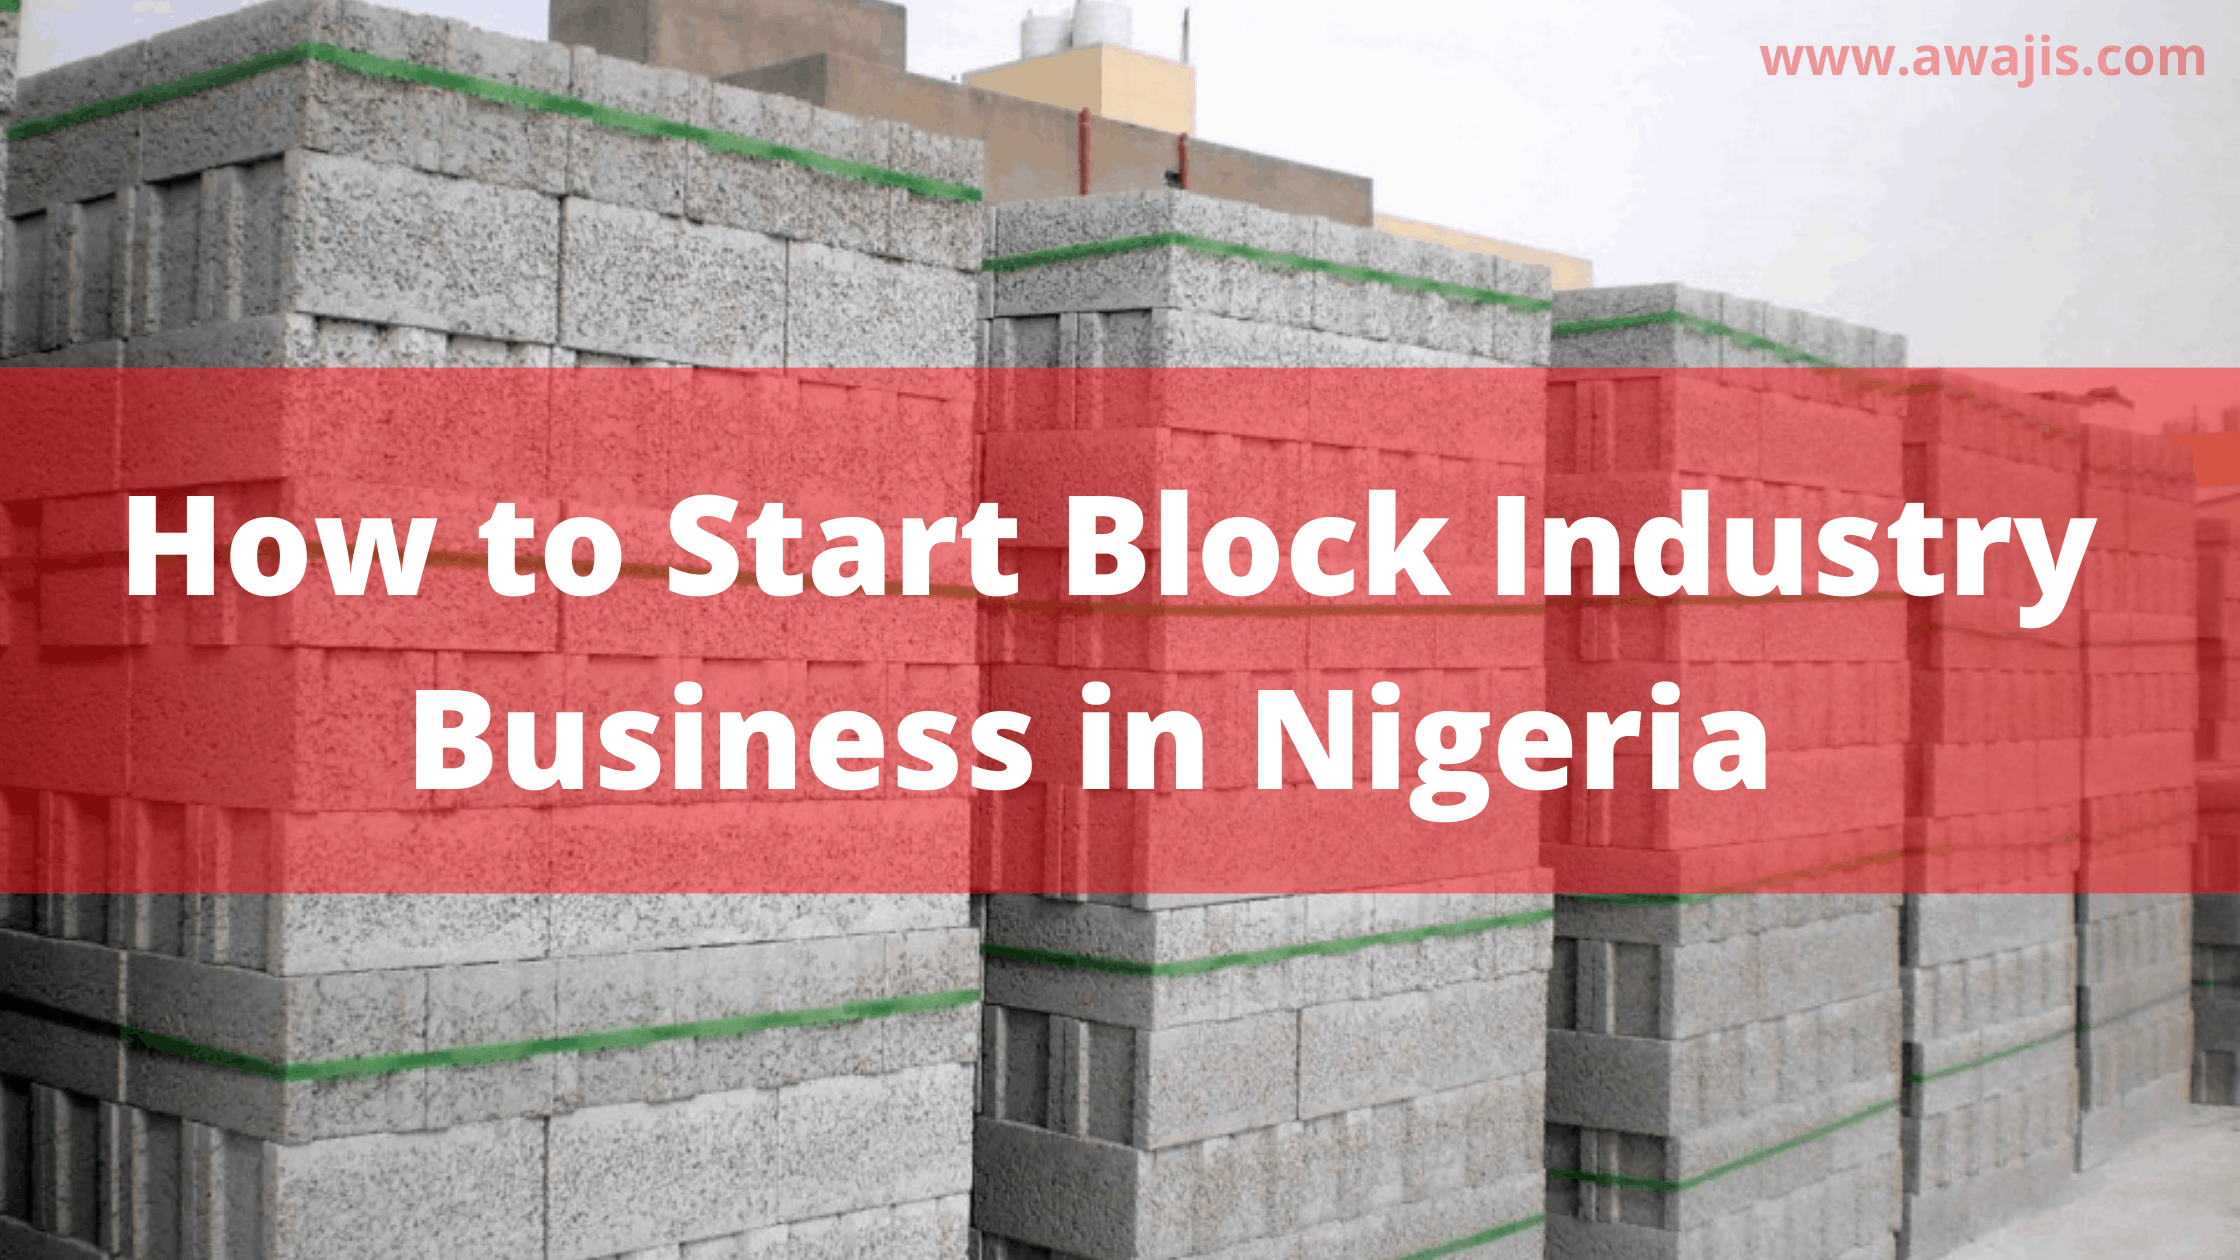 business plan for block industry in nigeria pdf